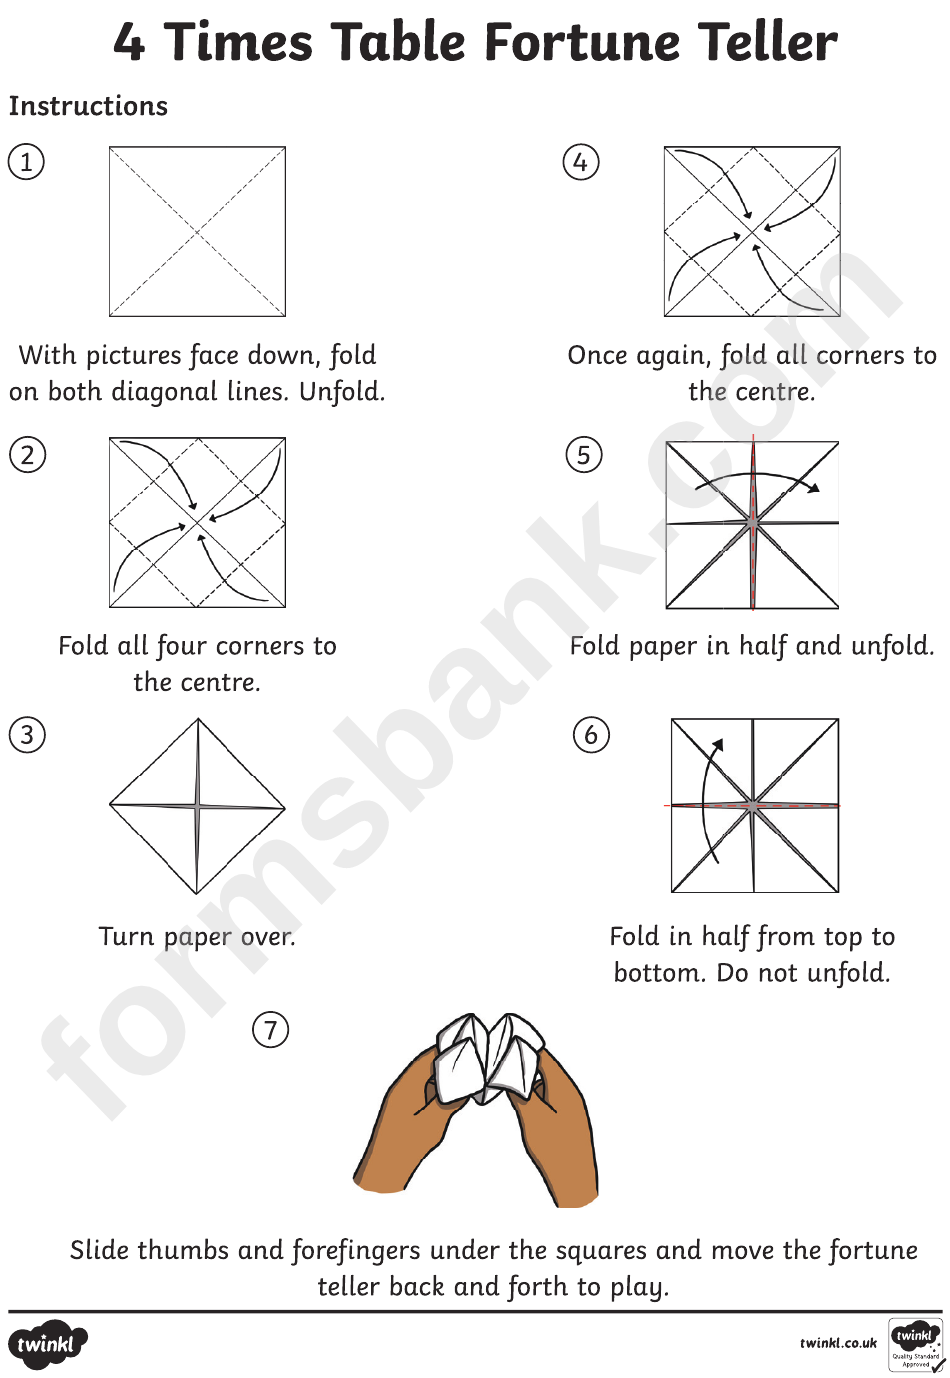 4 Times Table Fortune Teller Template